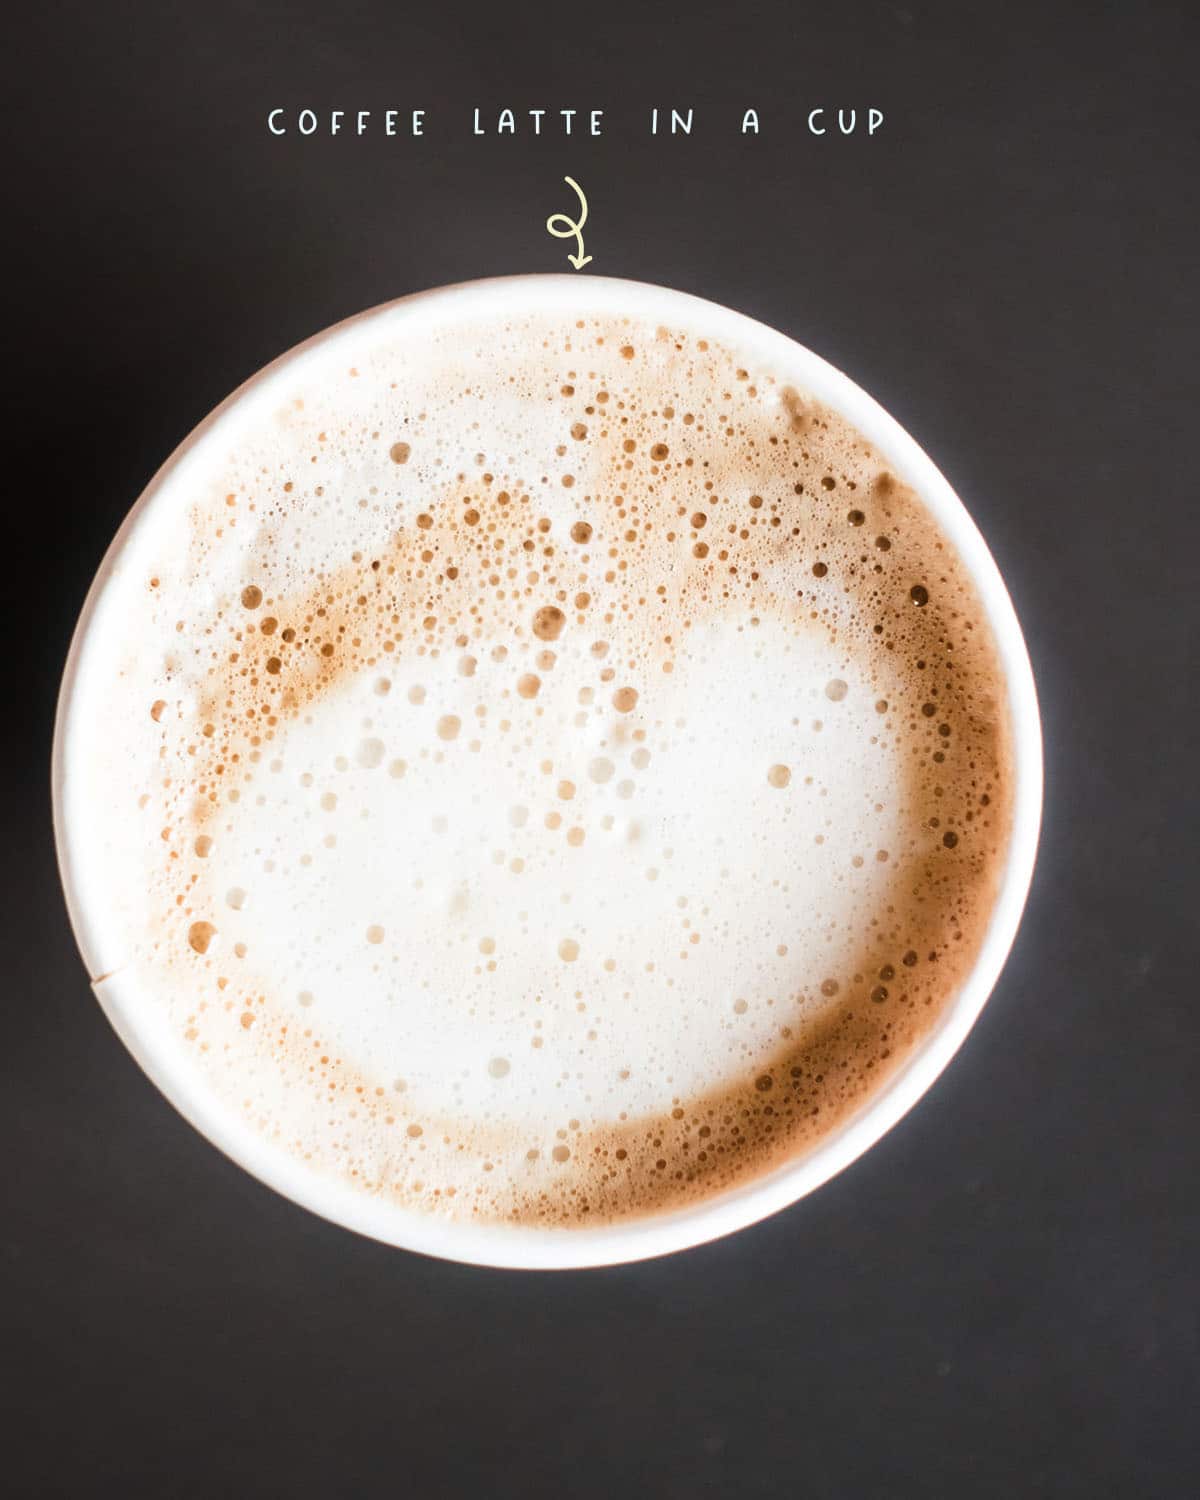 Whether you like it hot or cold, Starbucks has the latte for you. If you want your latte sweet and creamy, you can order it iced. If you prefer a more robust flavor, hot is a good choice.